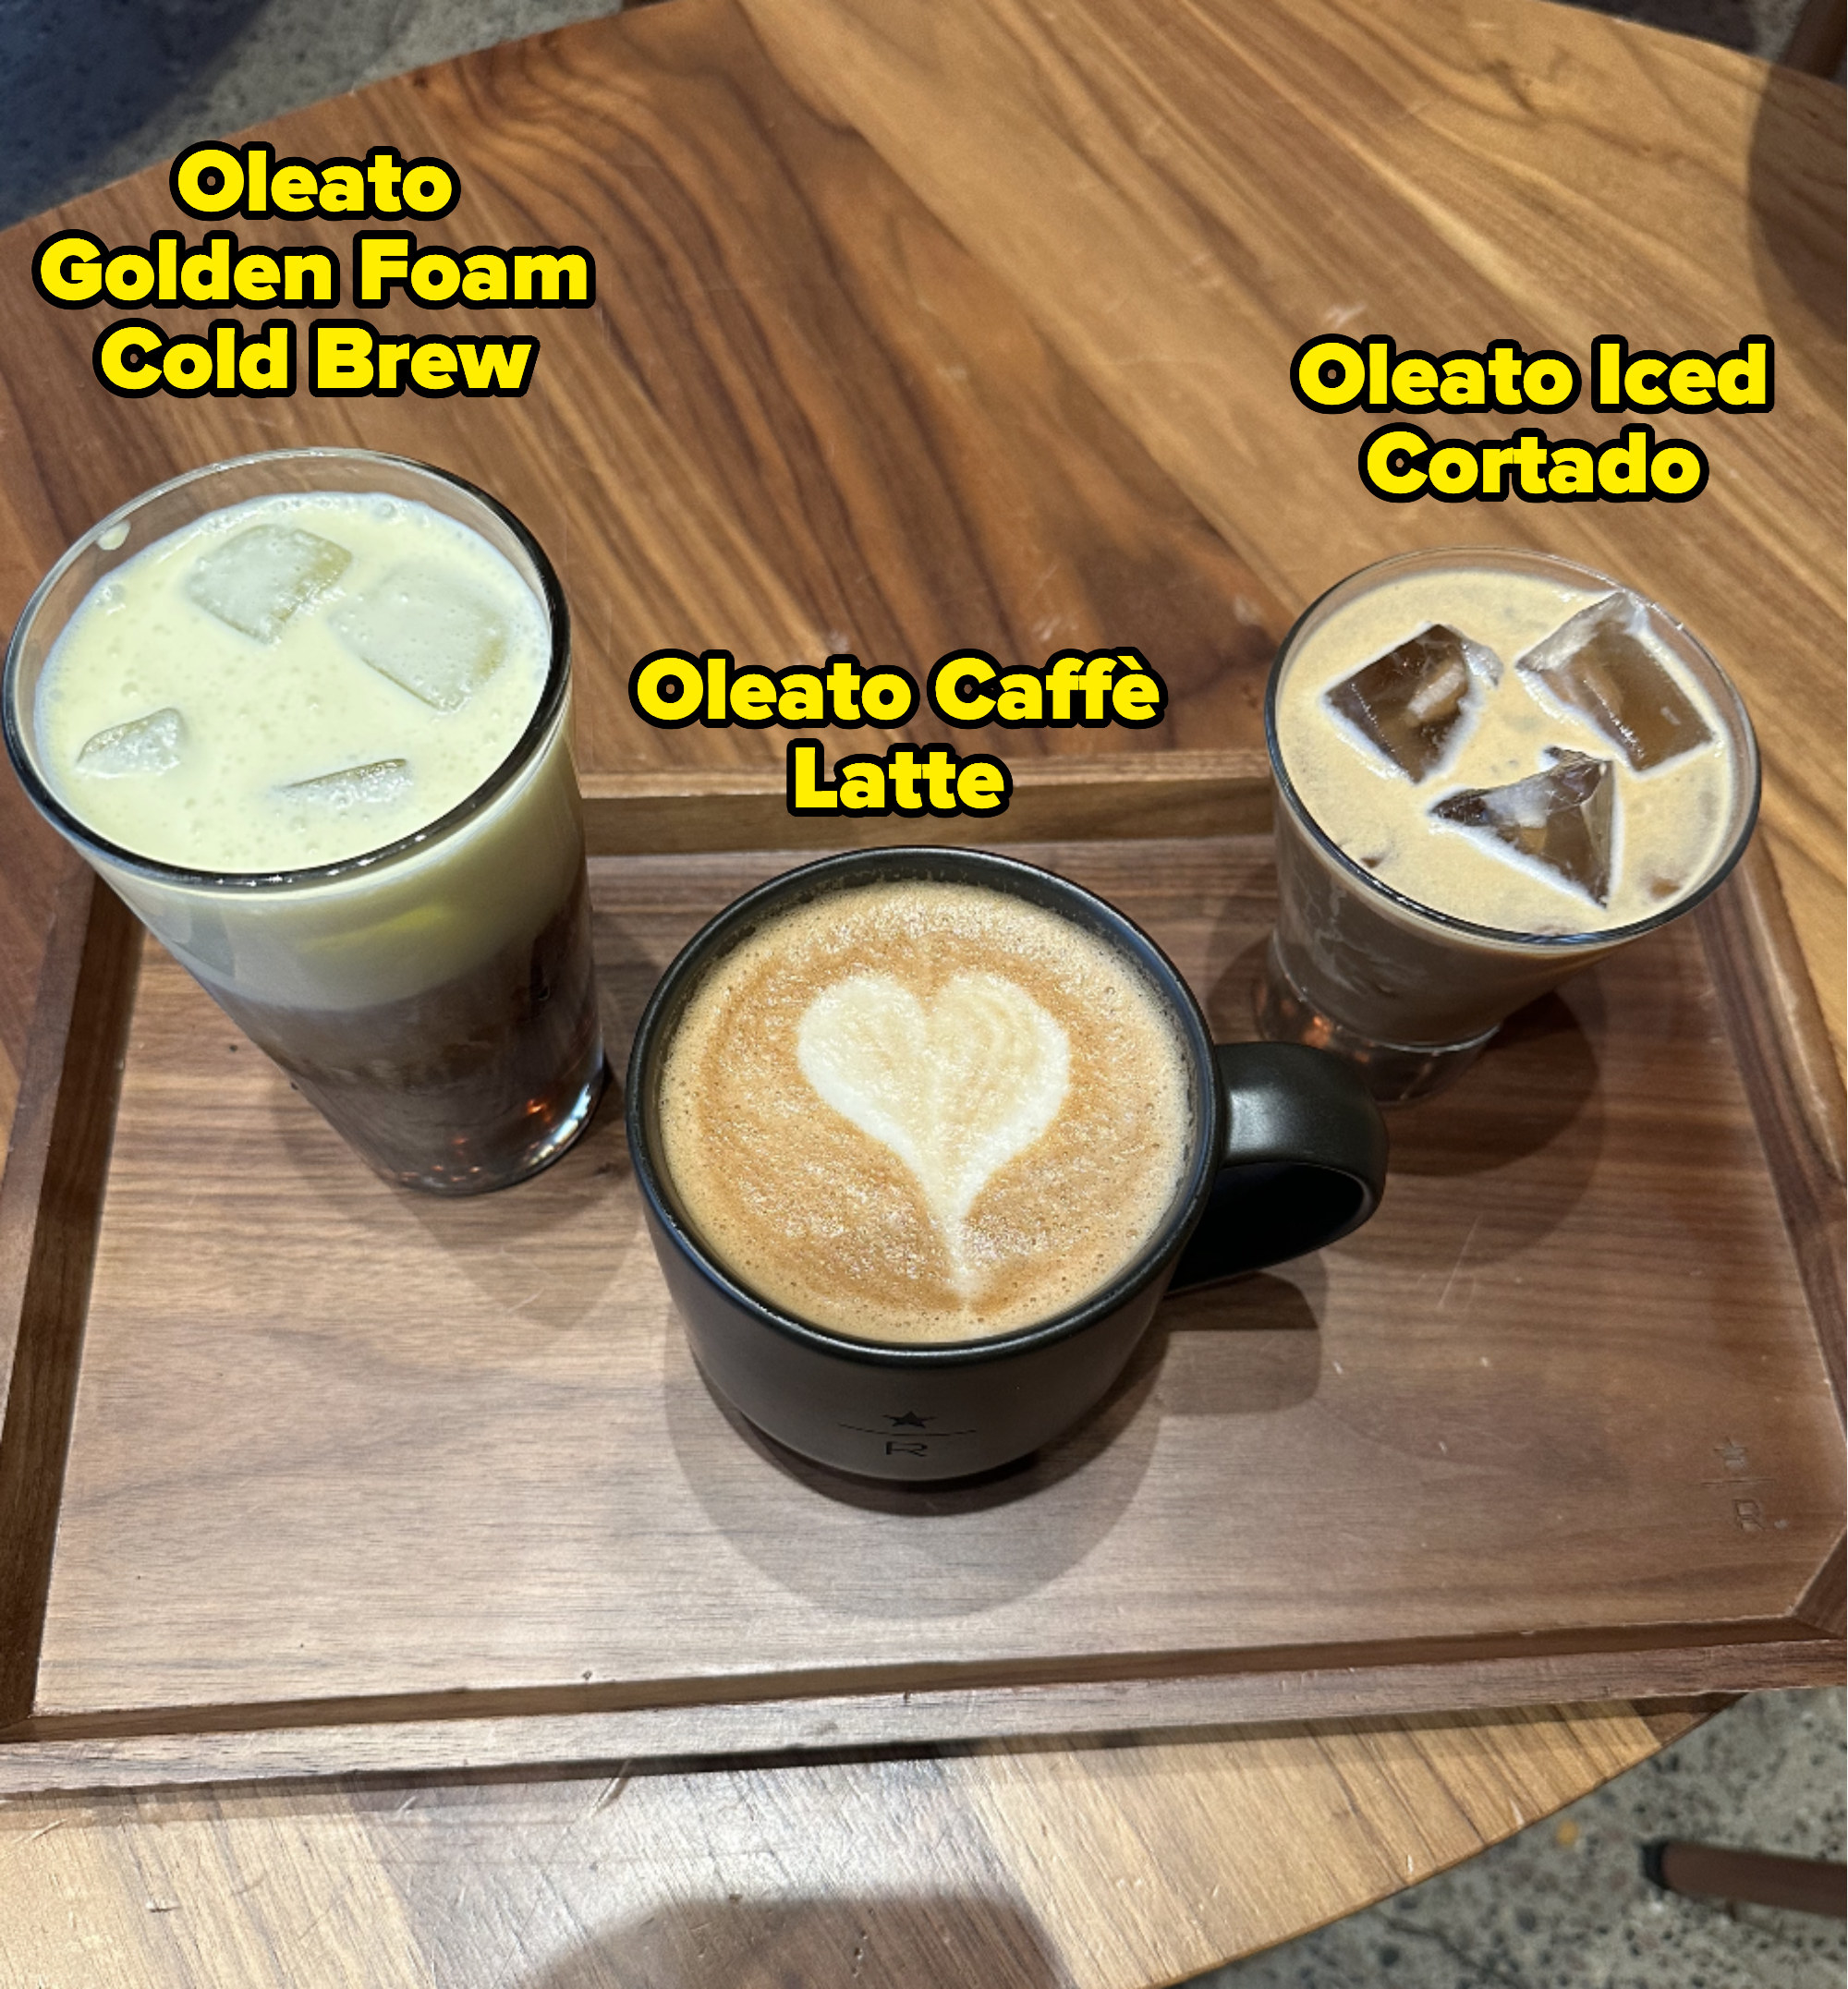 From left to right: the Oleato Golden Foam Cold Brew, the Oleato Caffe Latte, and the Oleato Iced Cortado on a wooden tray